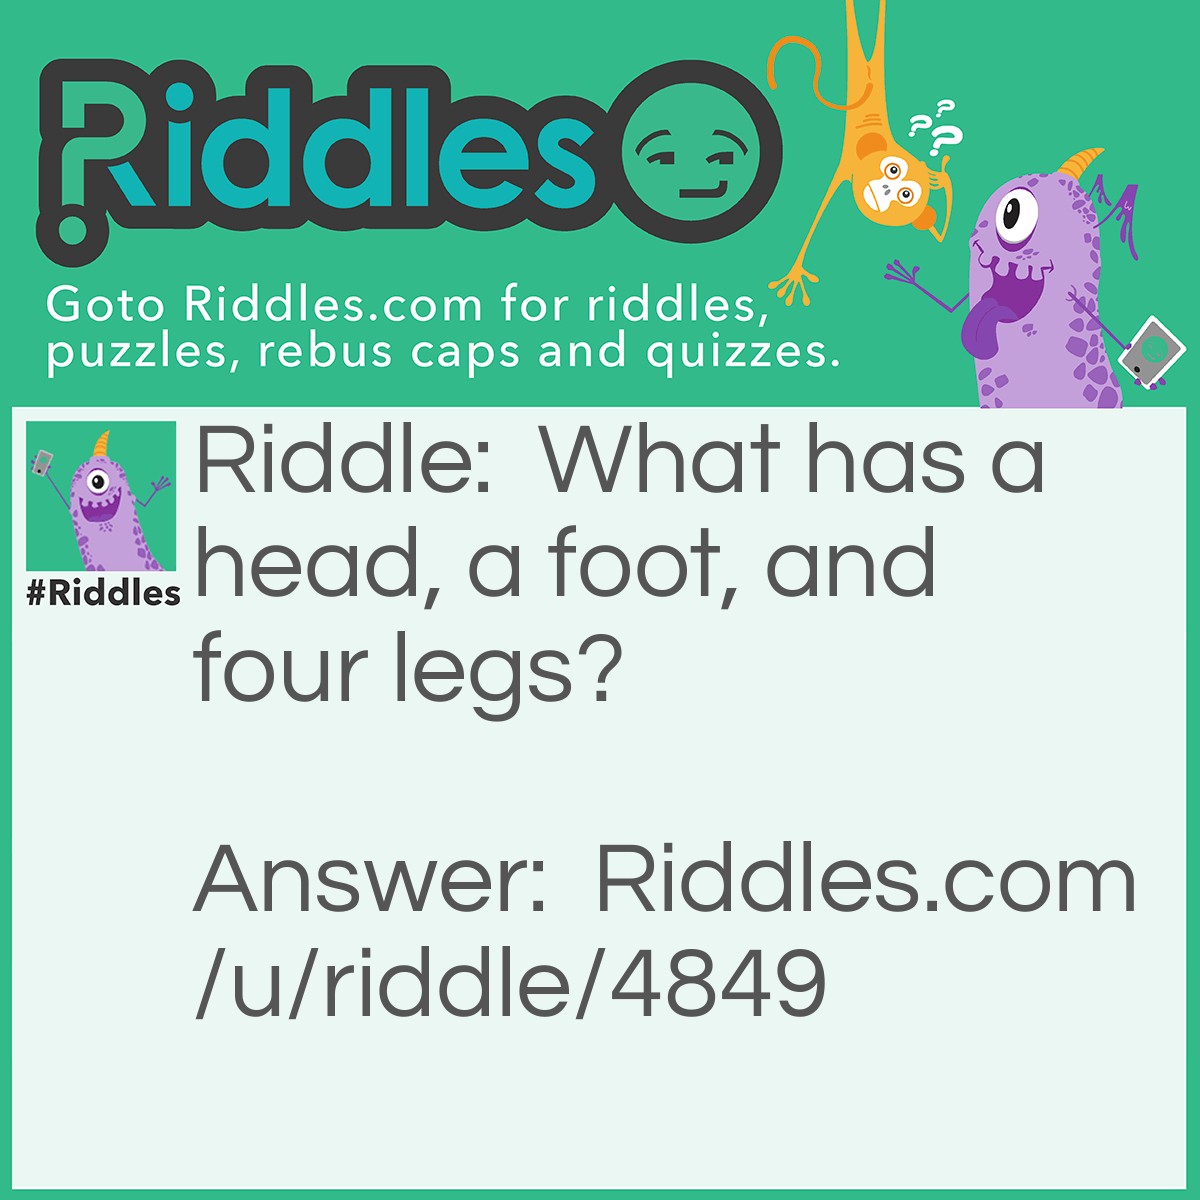 Riddle: What has a head, a foot, and four legs? Answer: A bed!